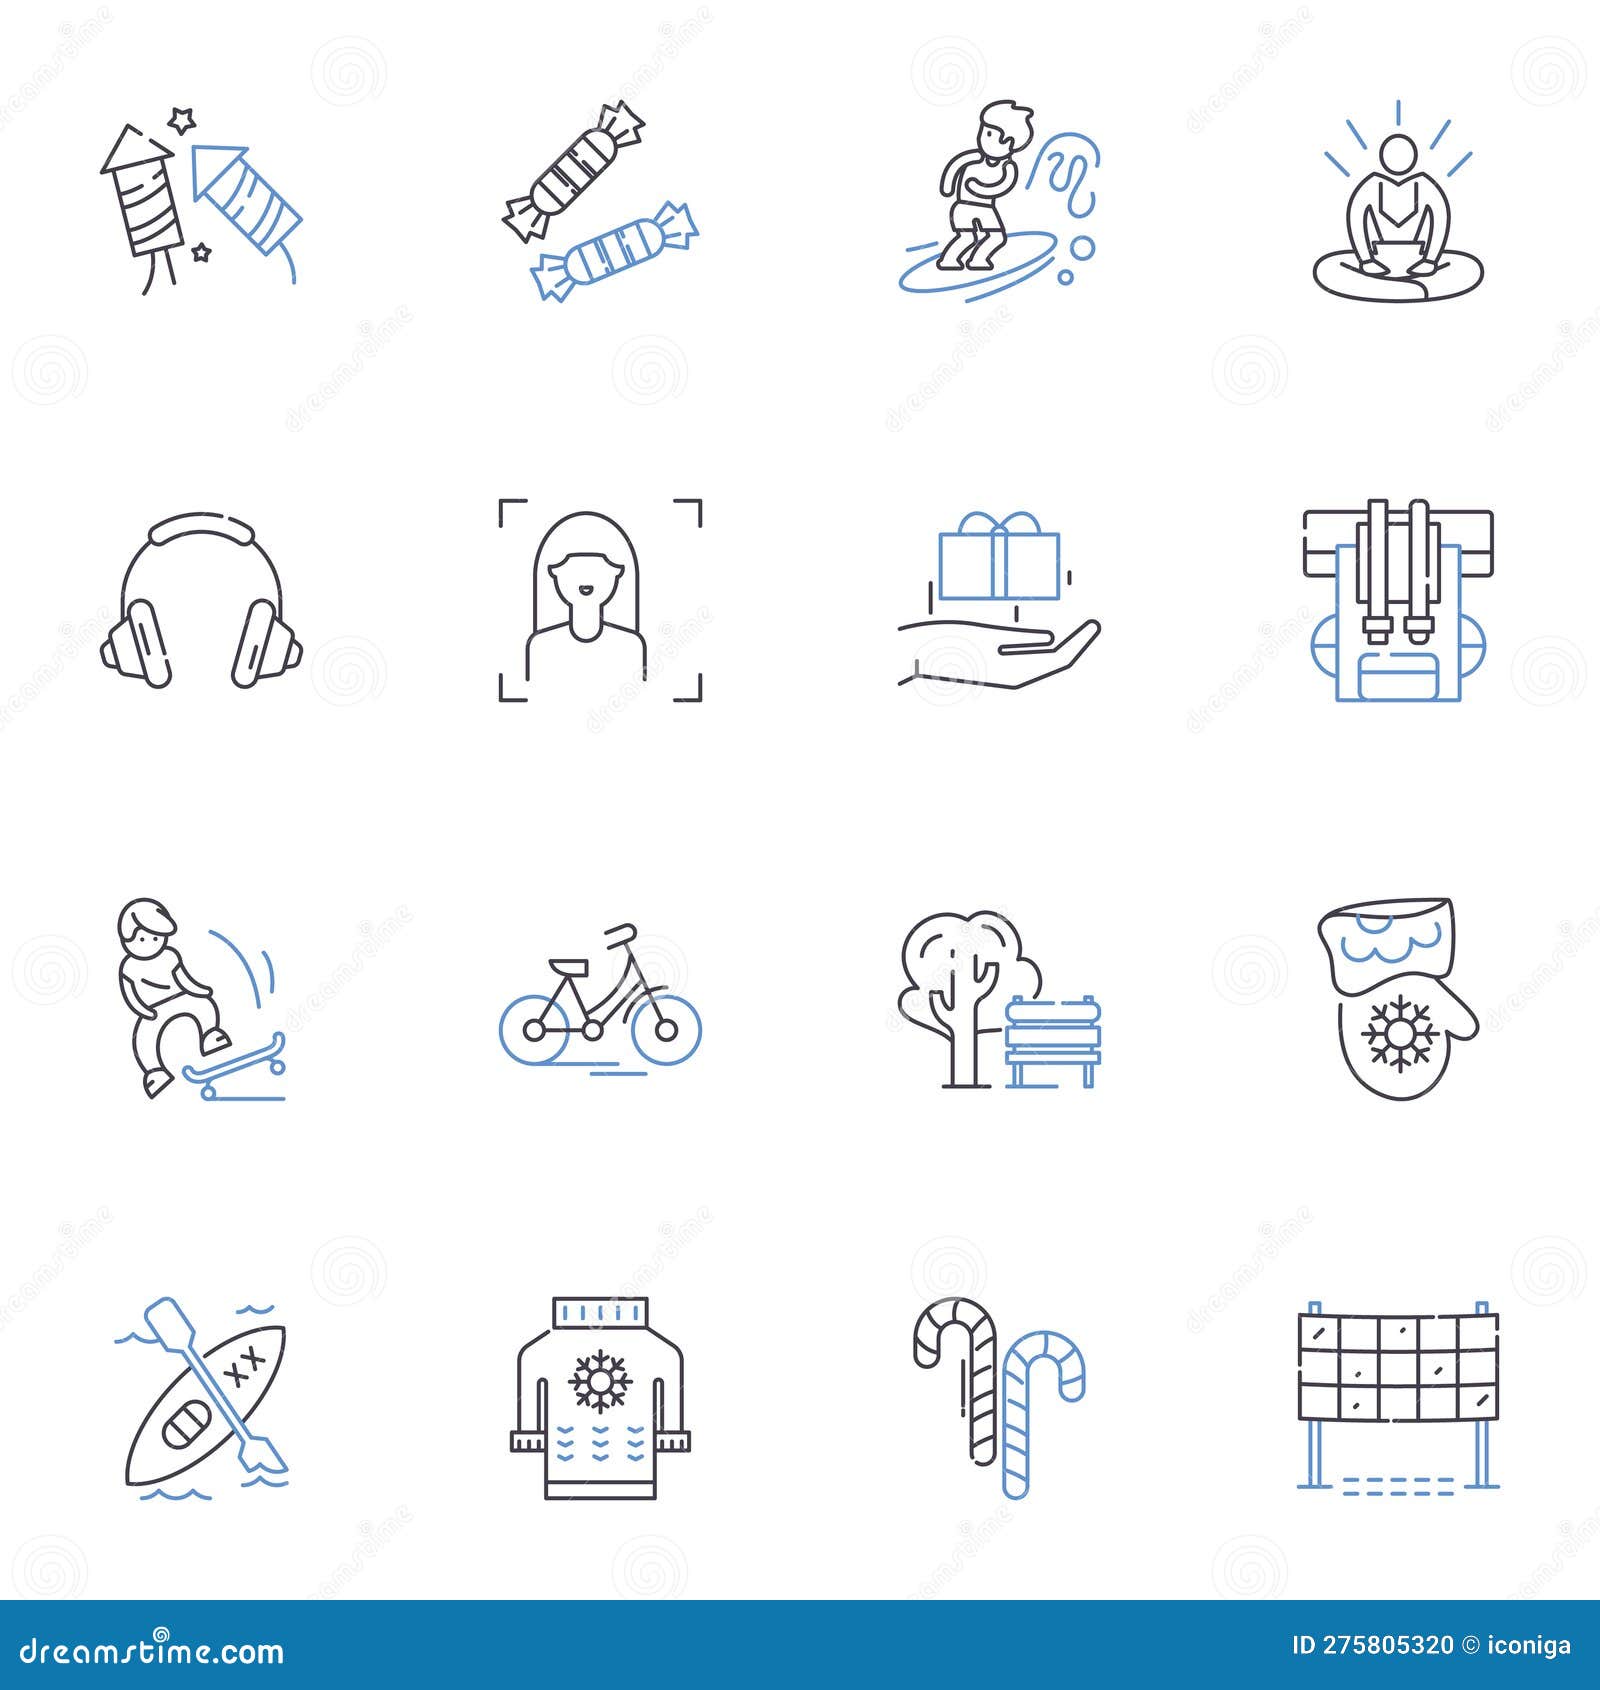 festivity line icons collection. celebration, holiday, joy, cheer, merriment, festive, excitement  and linear